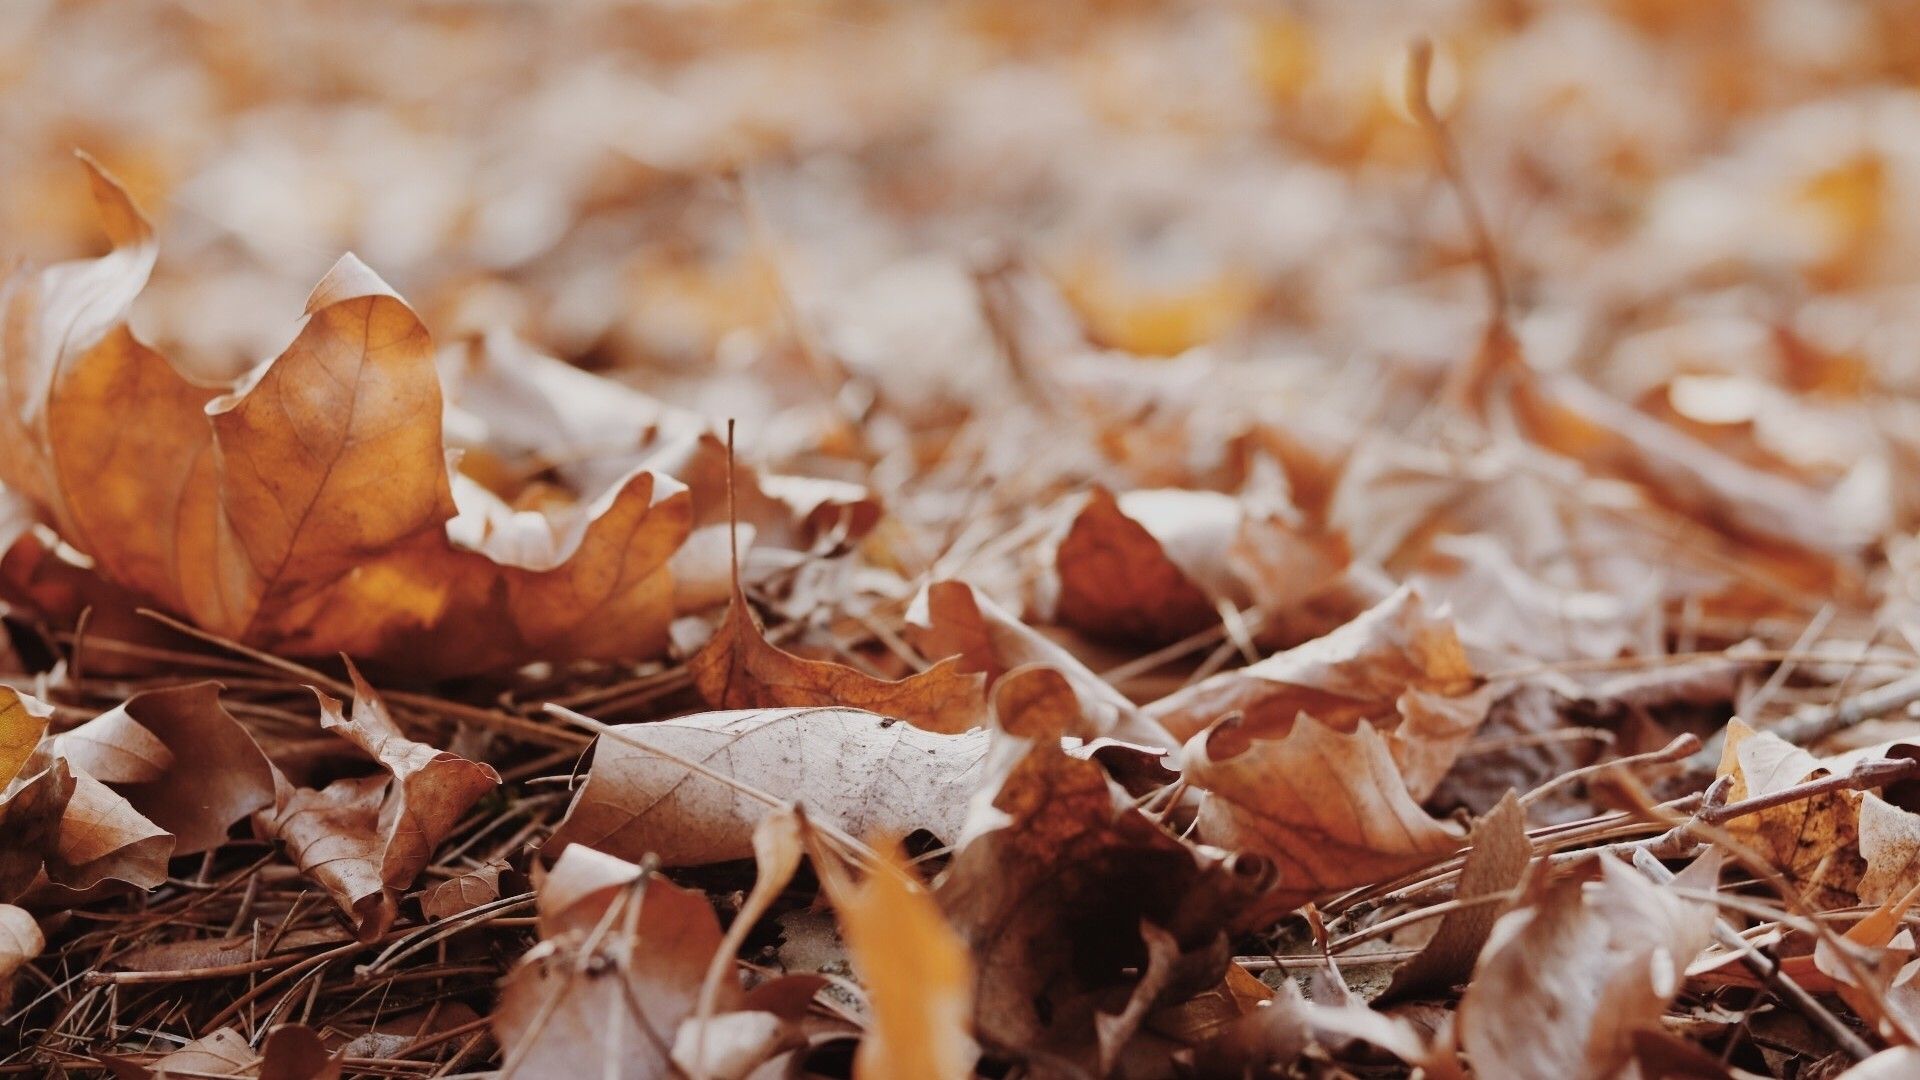 Download 1920x1080 Autumn Leaves, Ground, Blurry, Photography Wallpaper for Widescreen